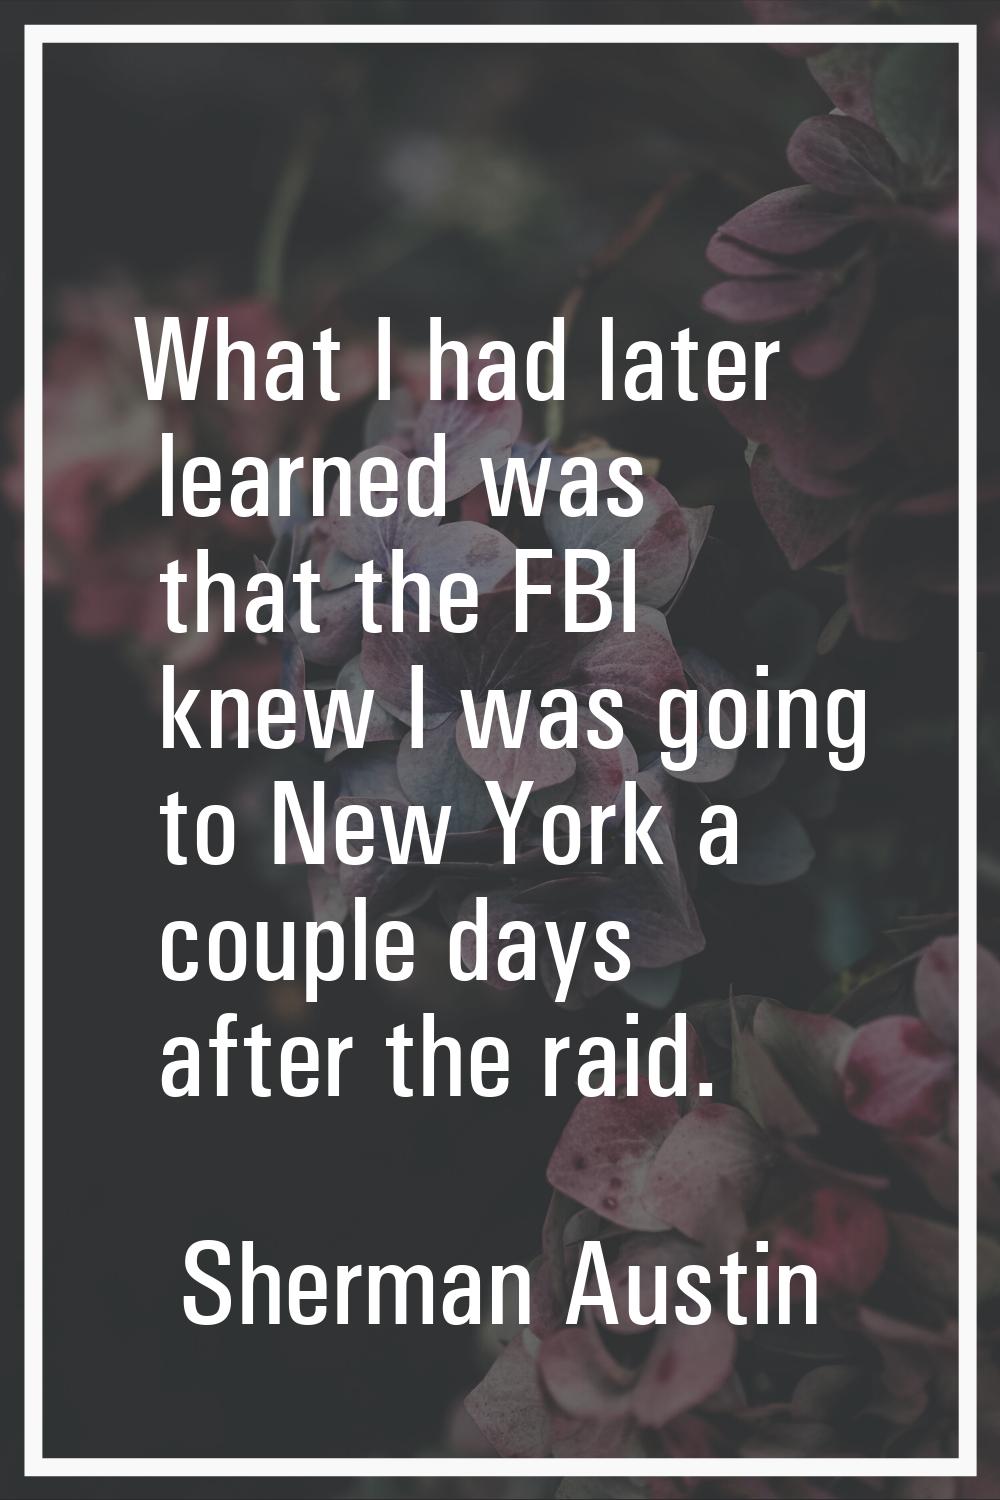 What I had later learned was that the FBI knew I was going to New York a couple days after the raid